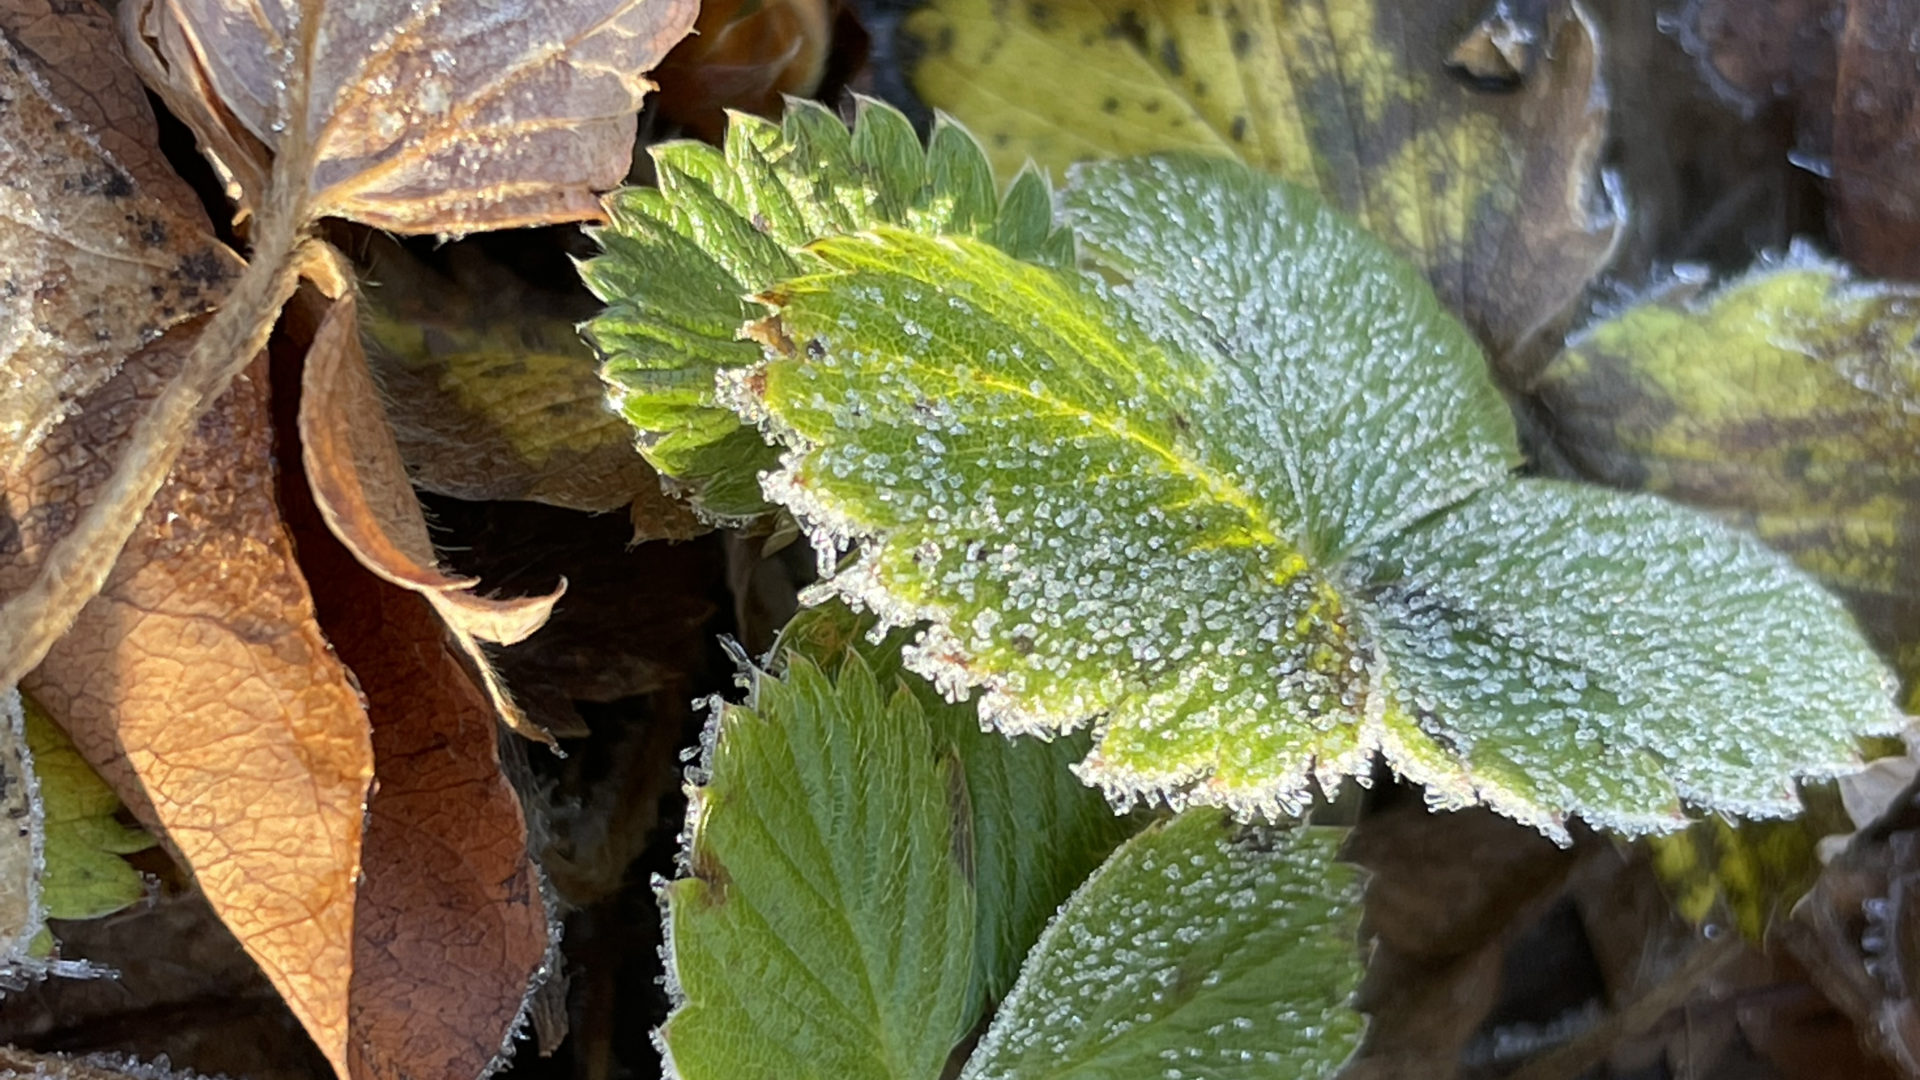 Frost shines on late strawberry leaves in the native wildflower garden at Bennington Museum,